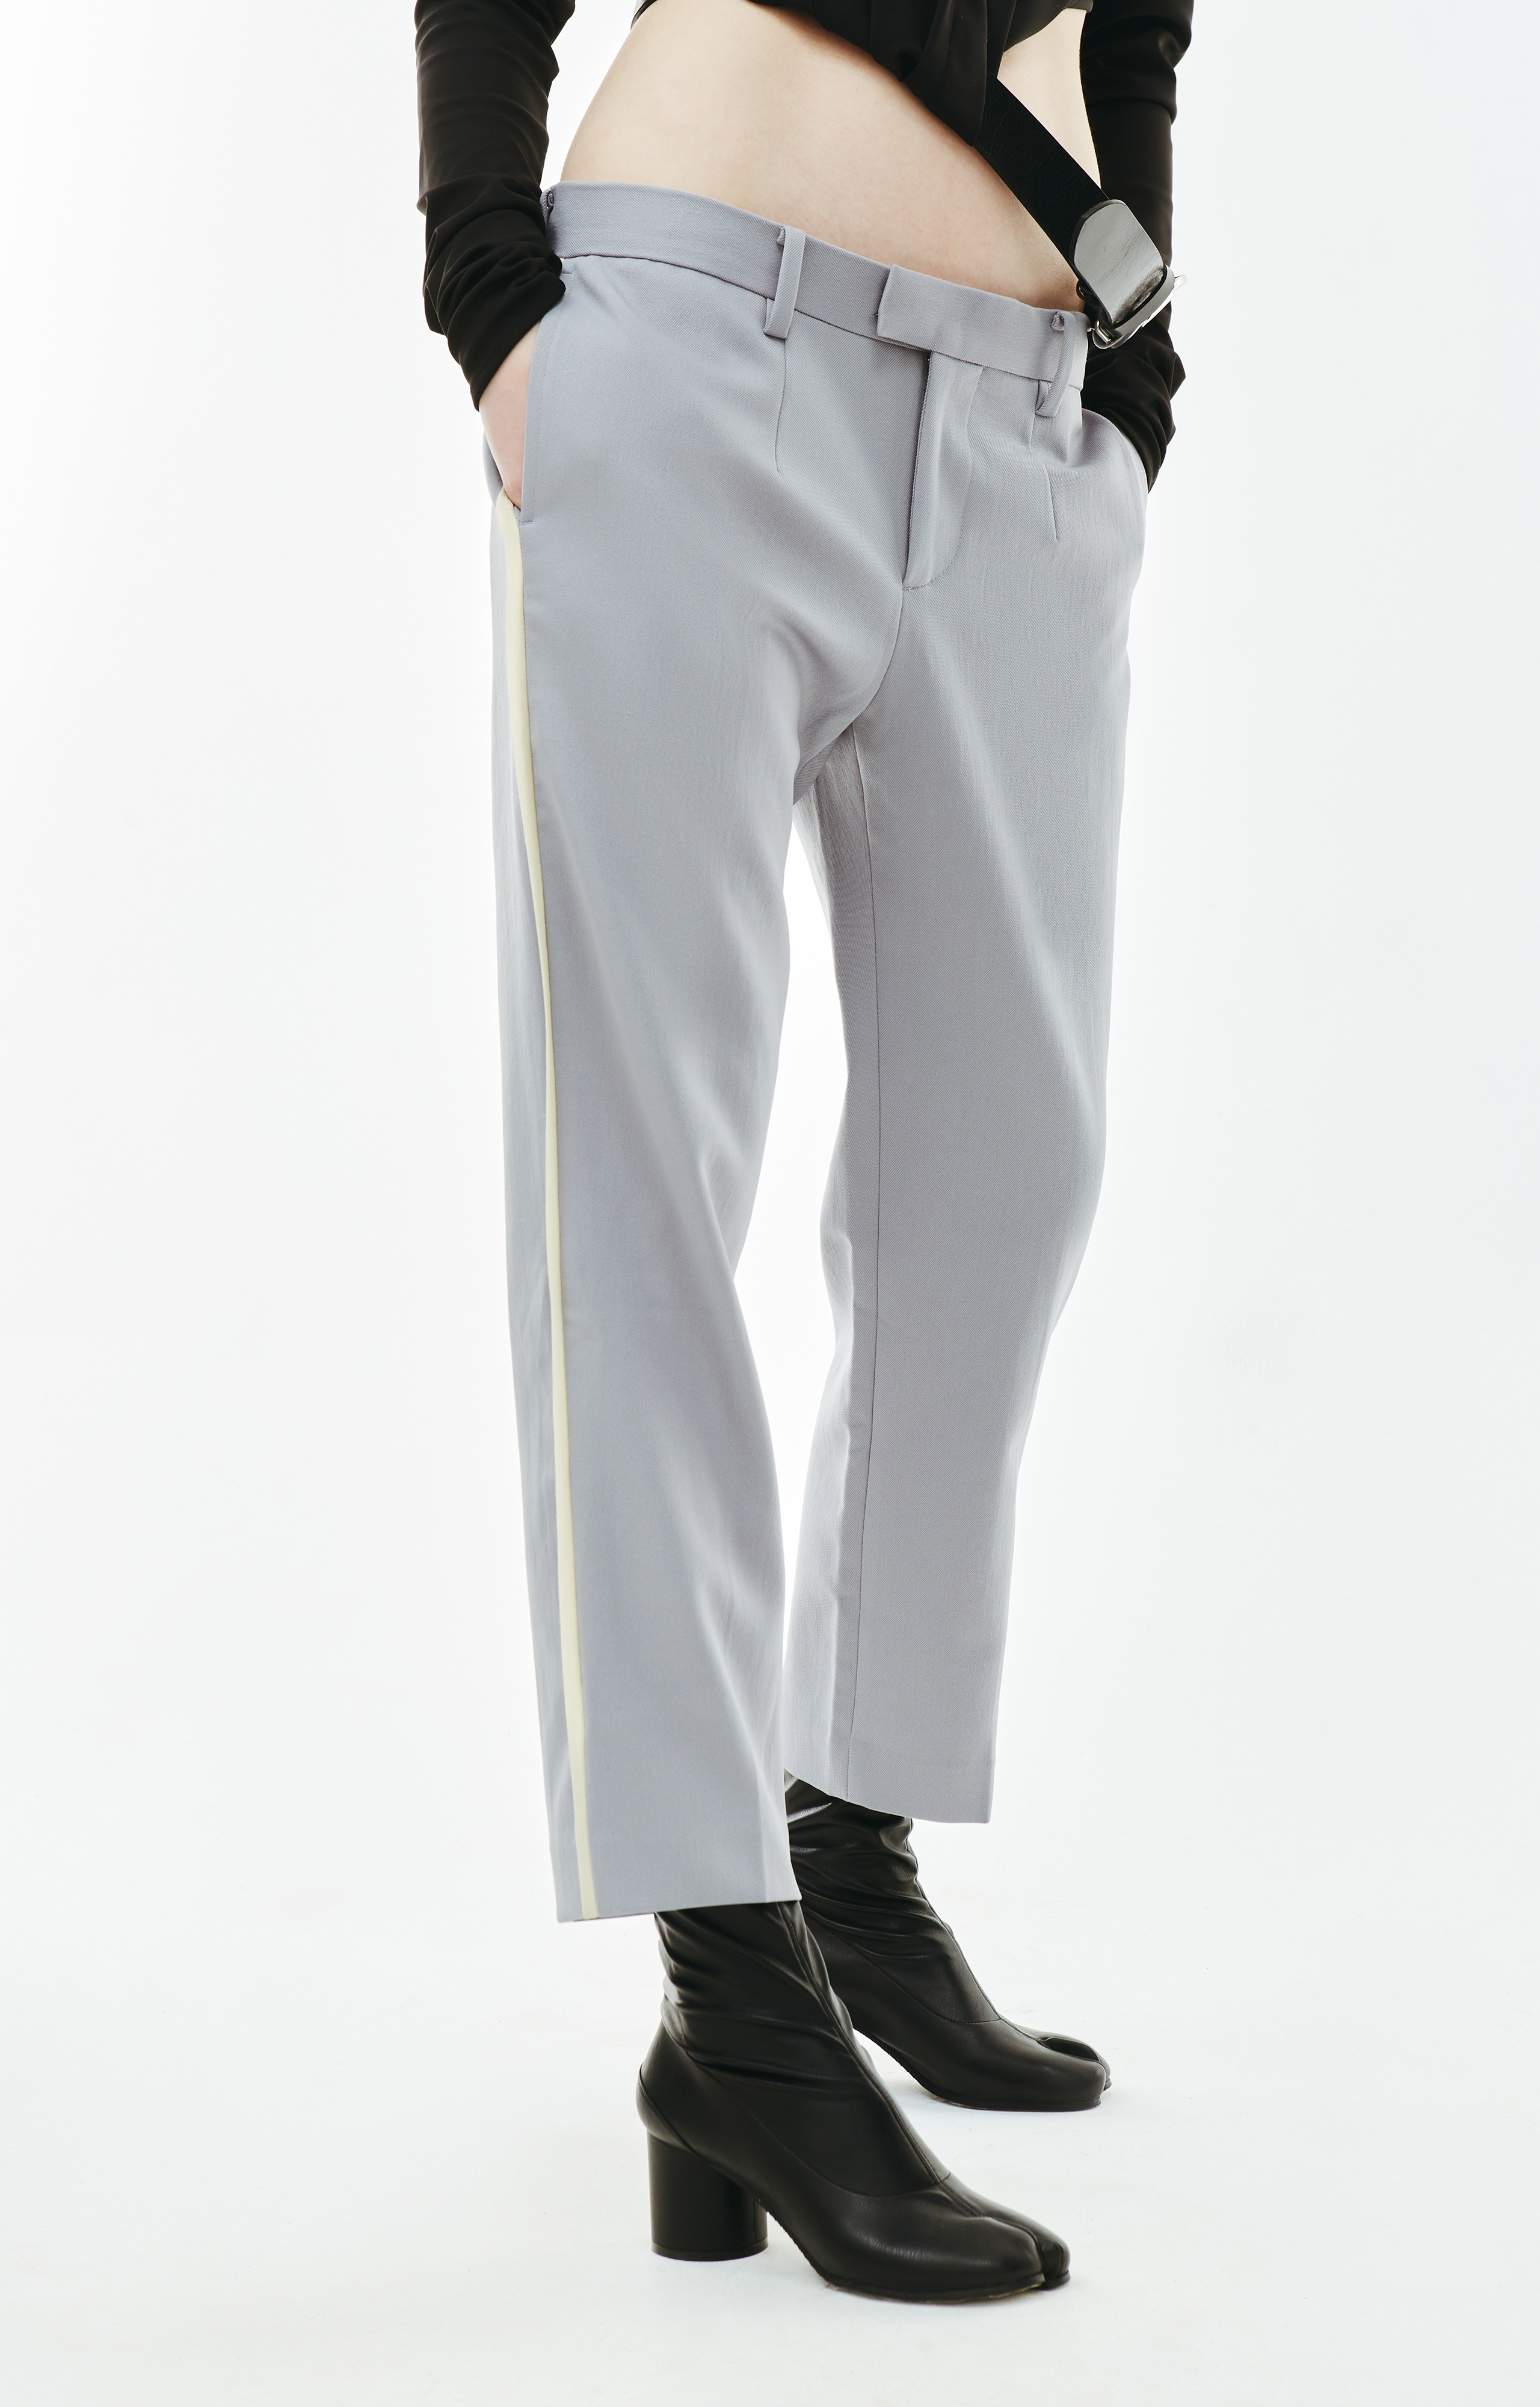 GREY POLYESTER TROUSERS - 5